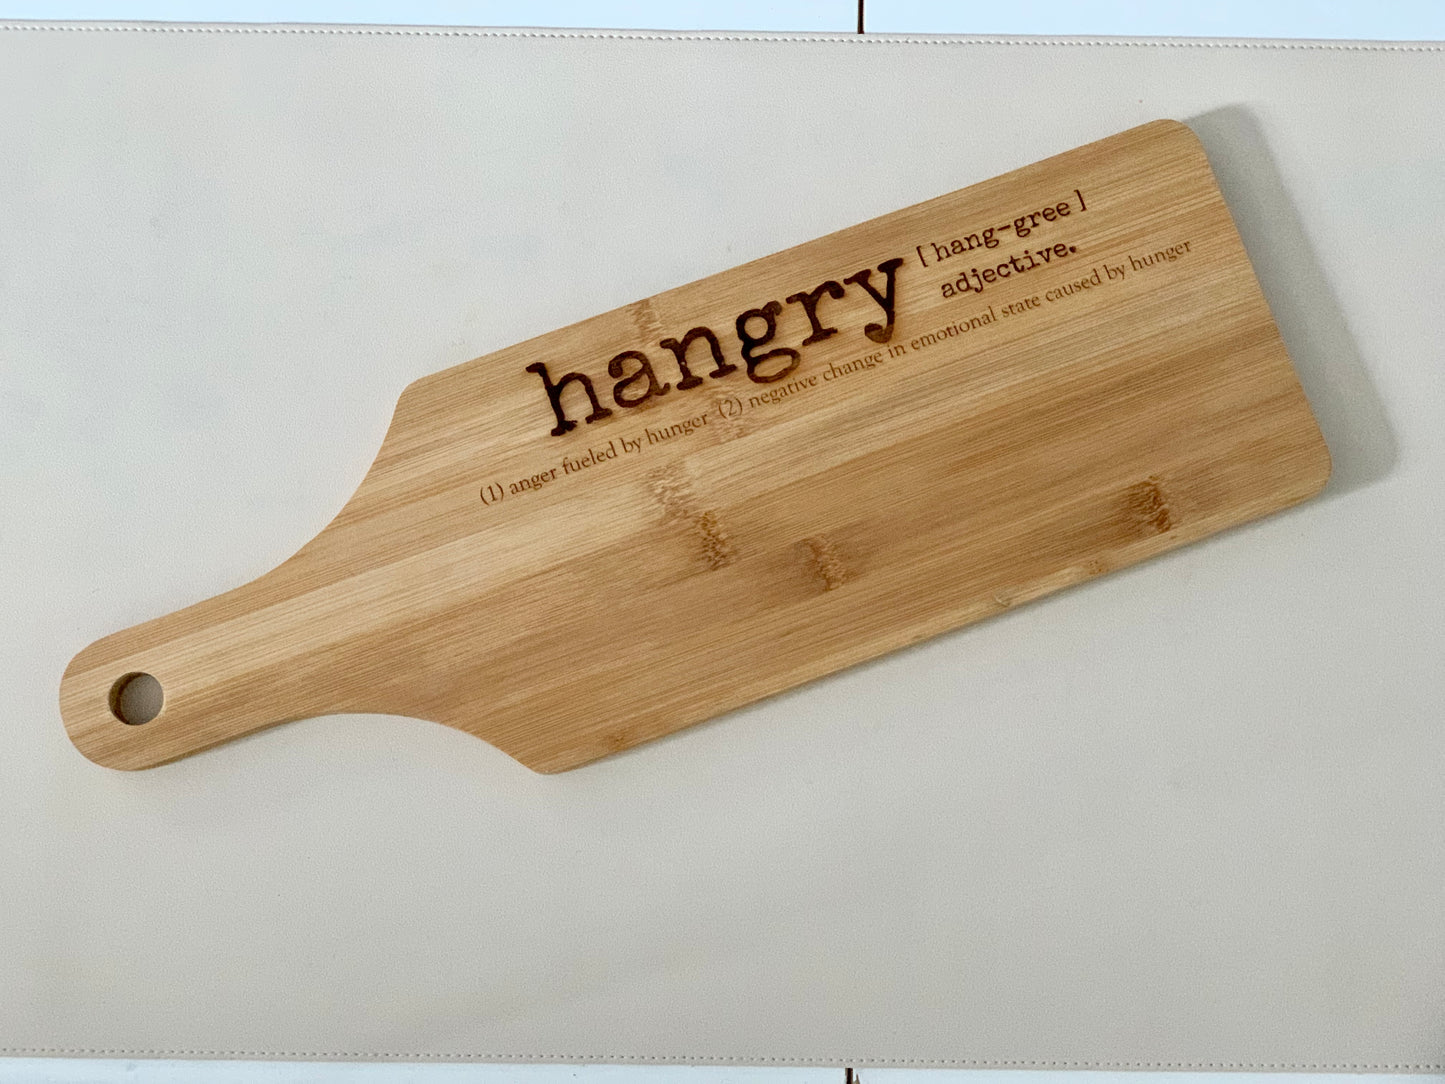 Ready to Ship Hangry Cutting / Serving / Charcuterie Board